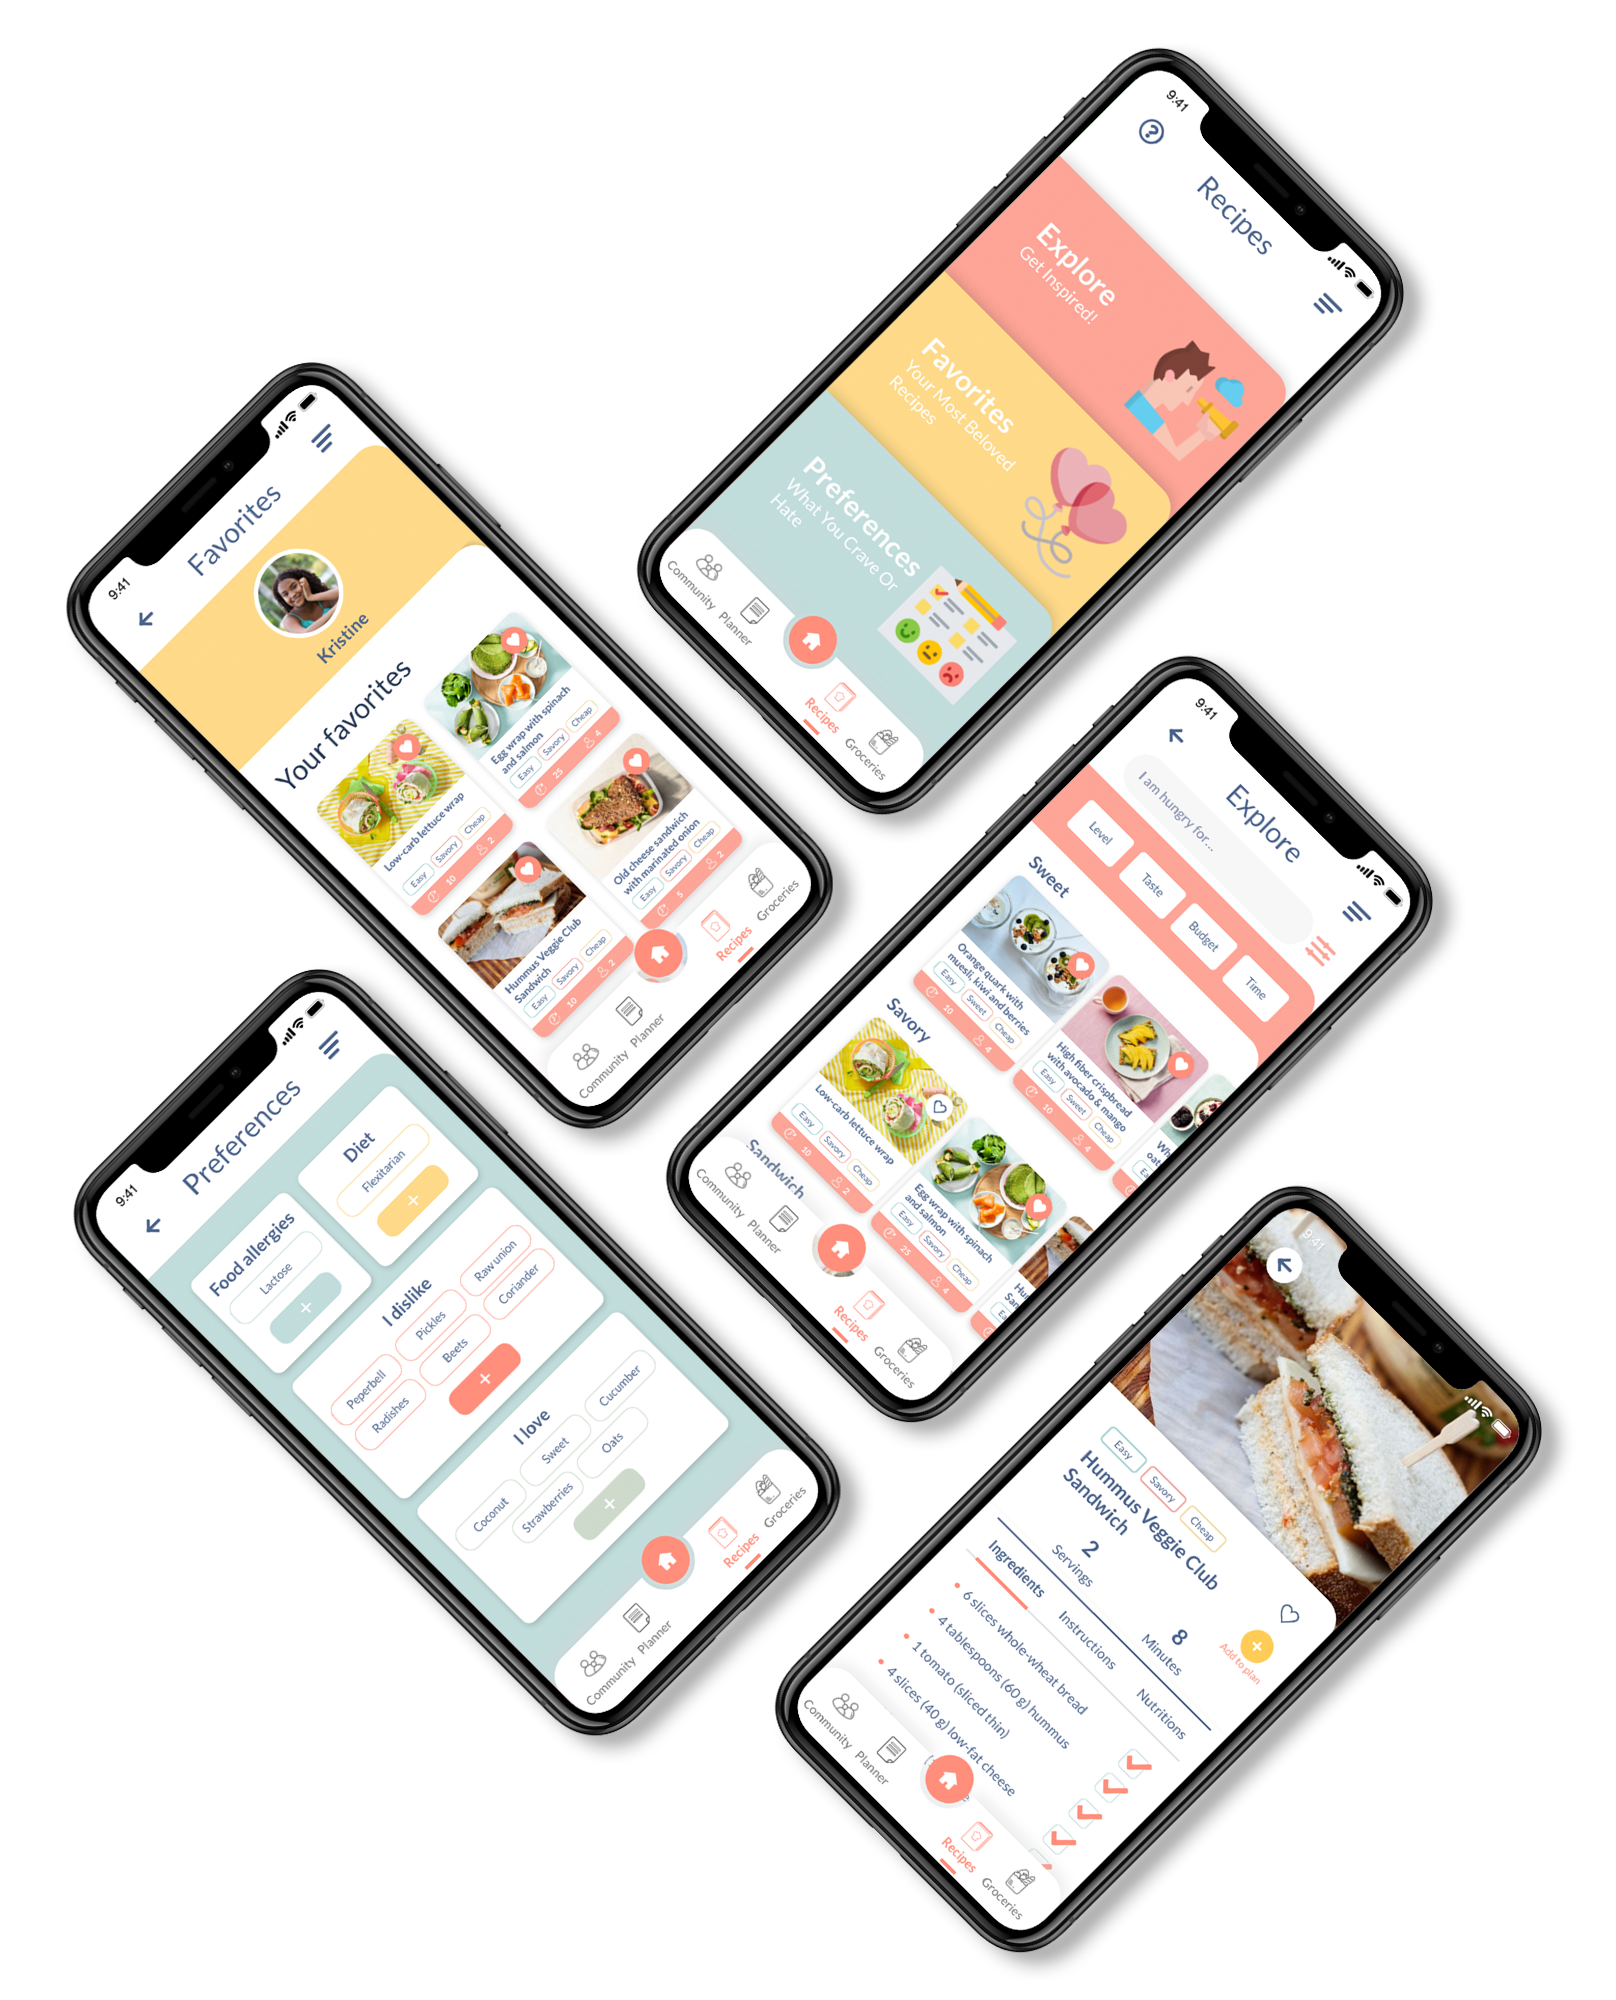 Mockup with screens from ChefPrep